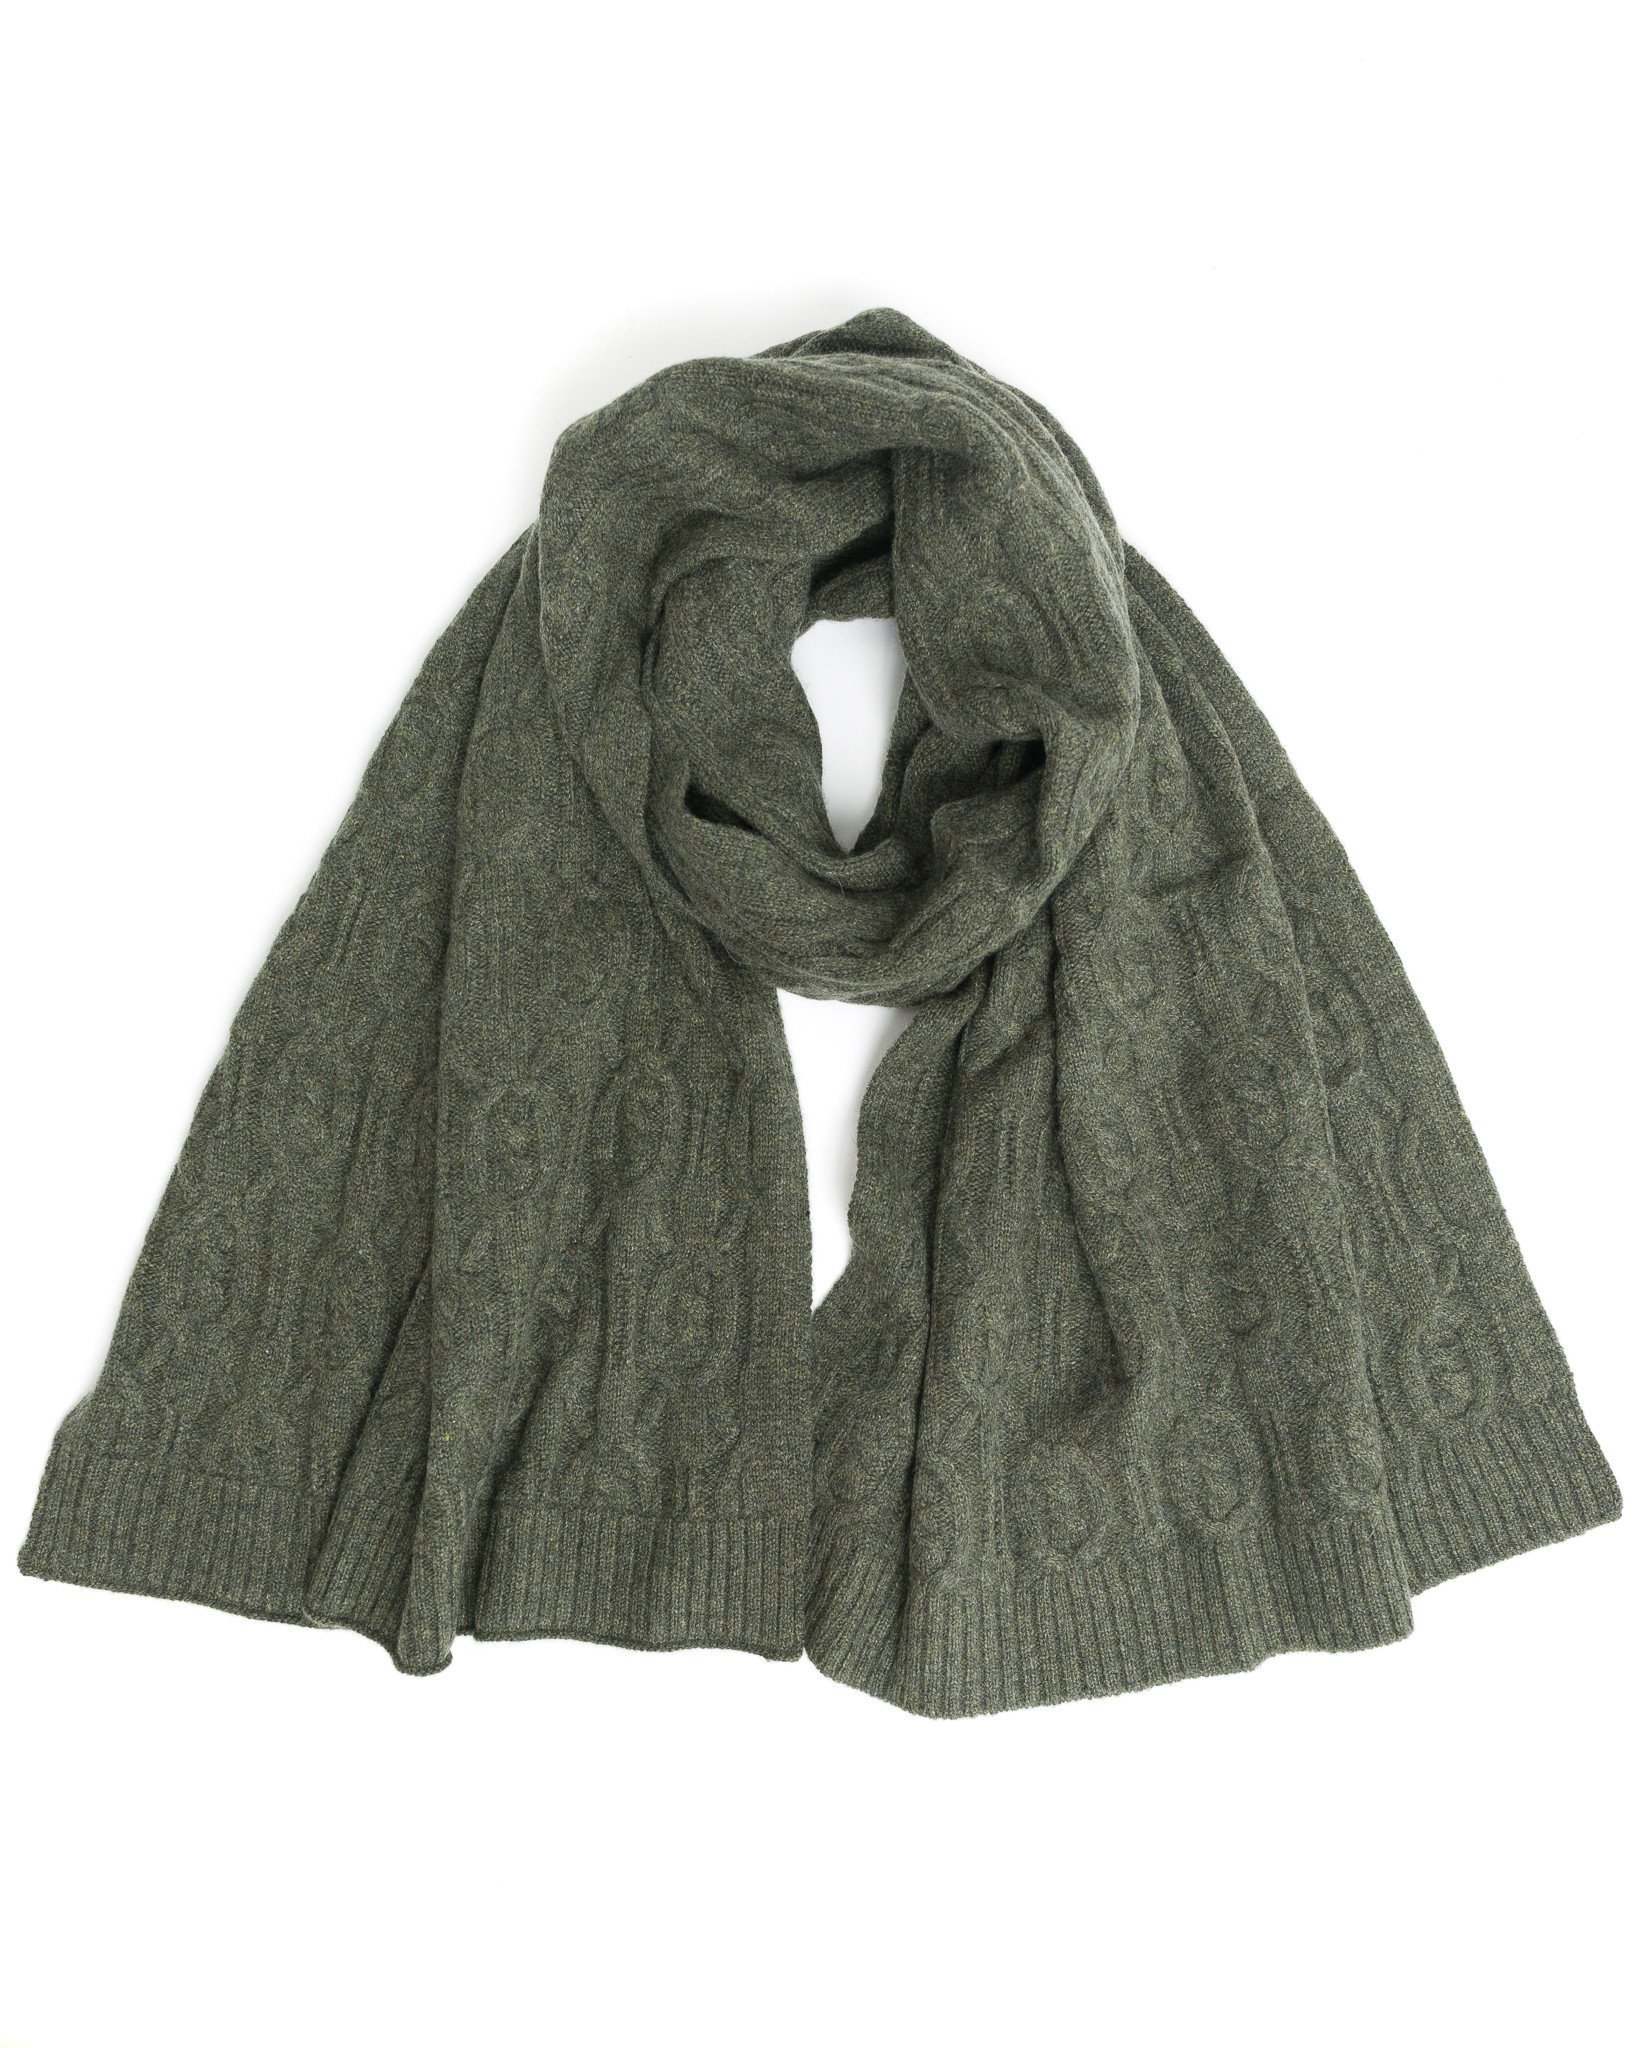 accessories - cable cashmere scarf AAQXAIZ